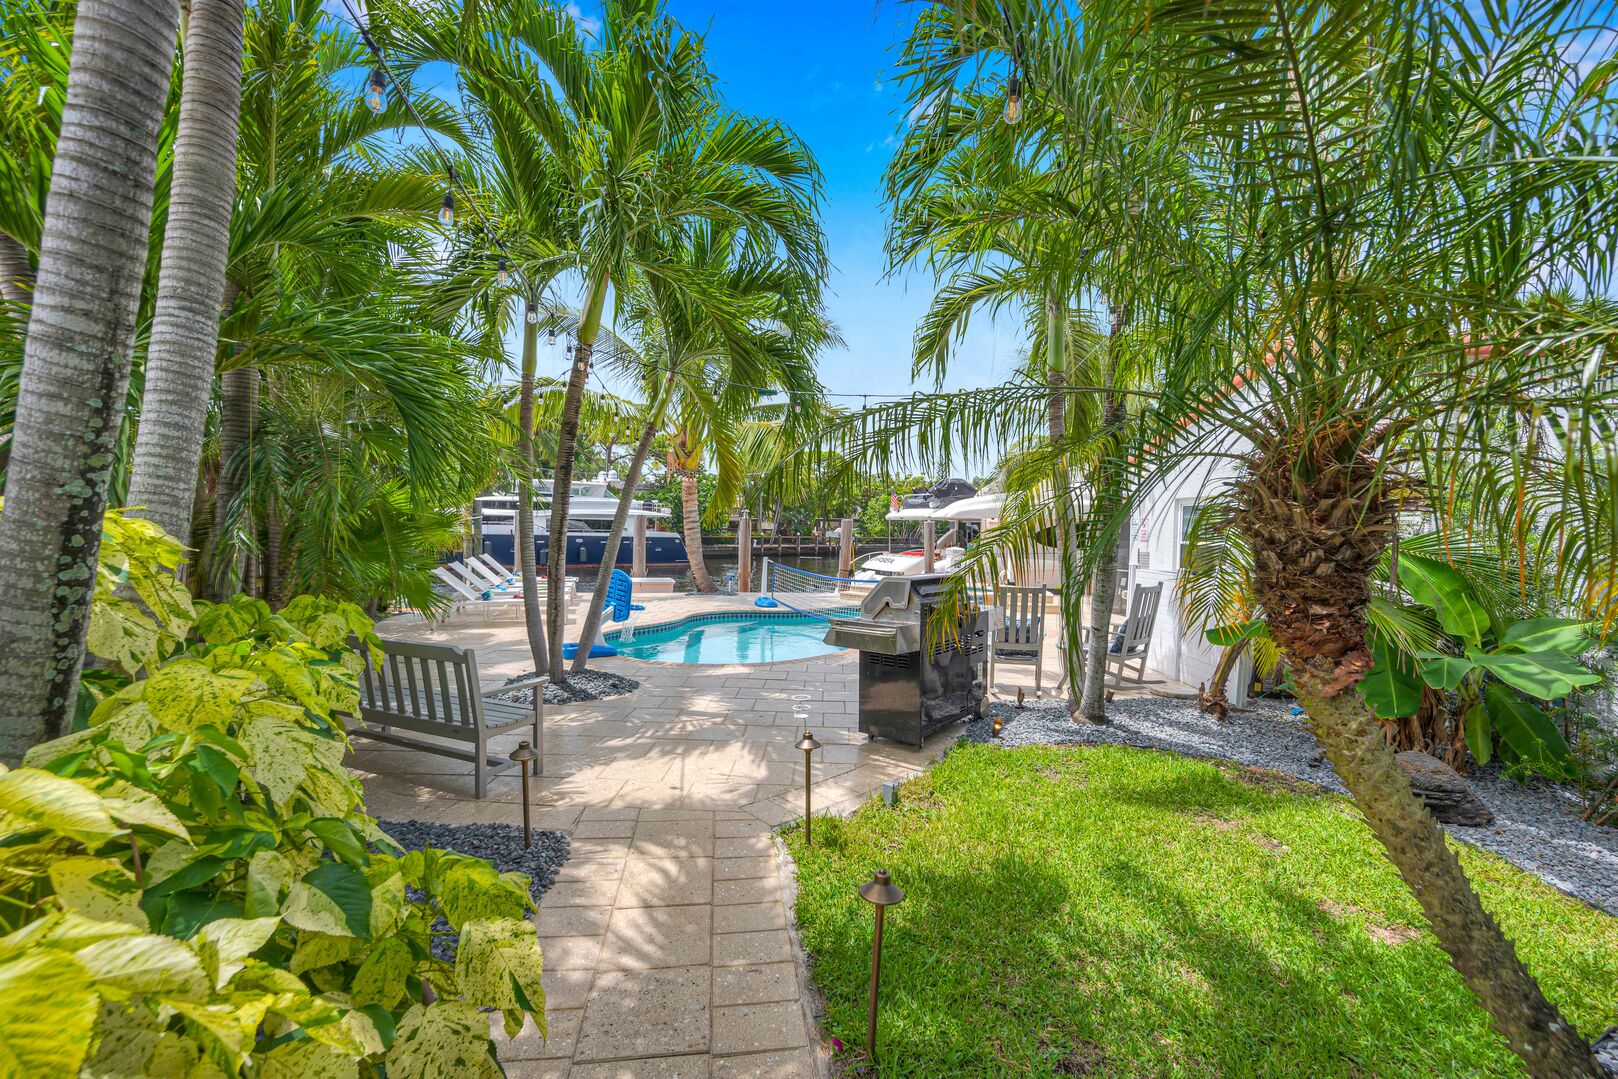 The luscious backyard is massive and really helps guests feel like they are in a tropical paradise!